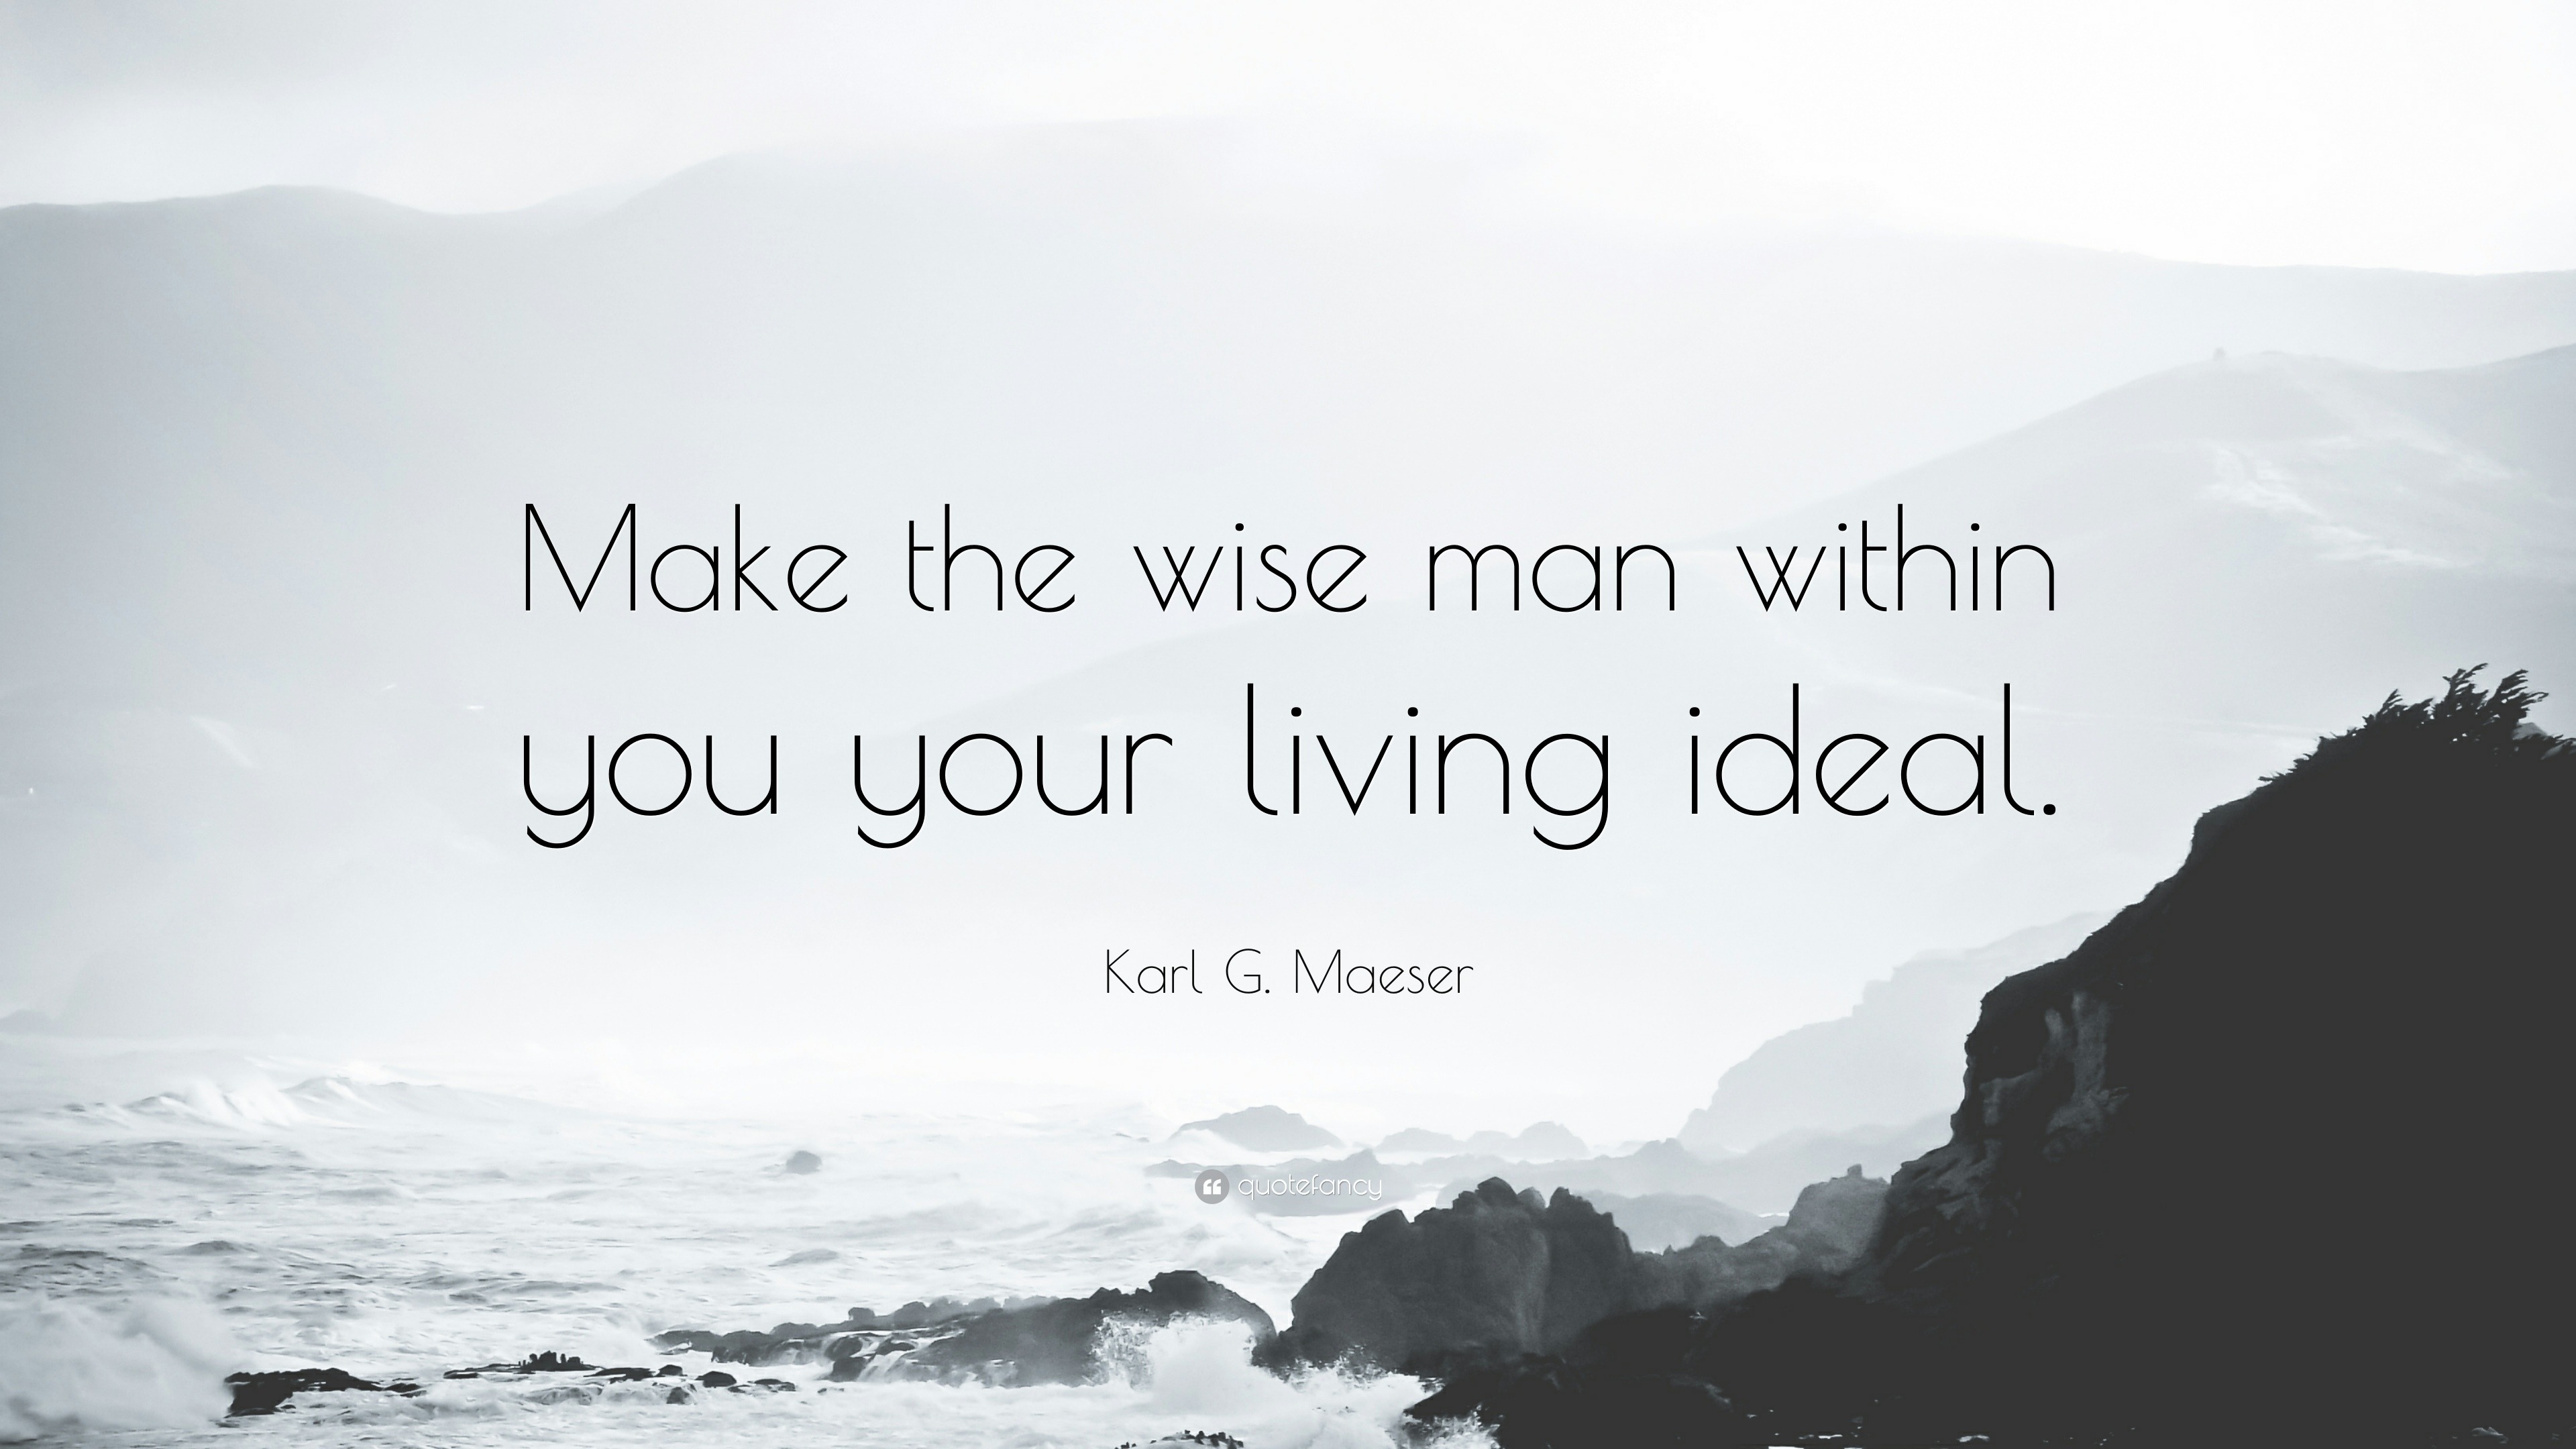 Karl G. Maeser Quote: “Make the wise man within you your living ideal.”